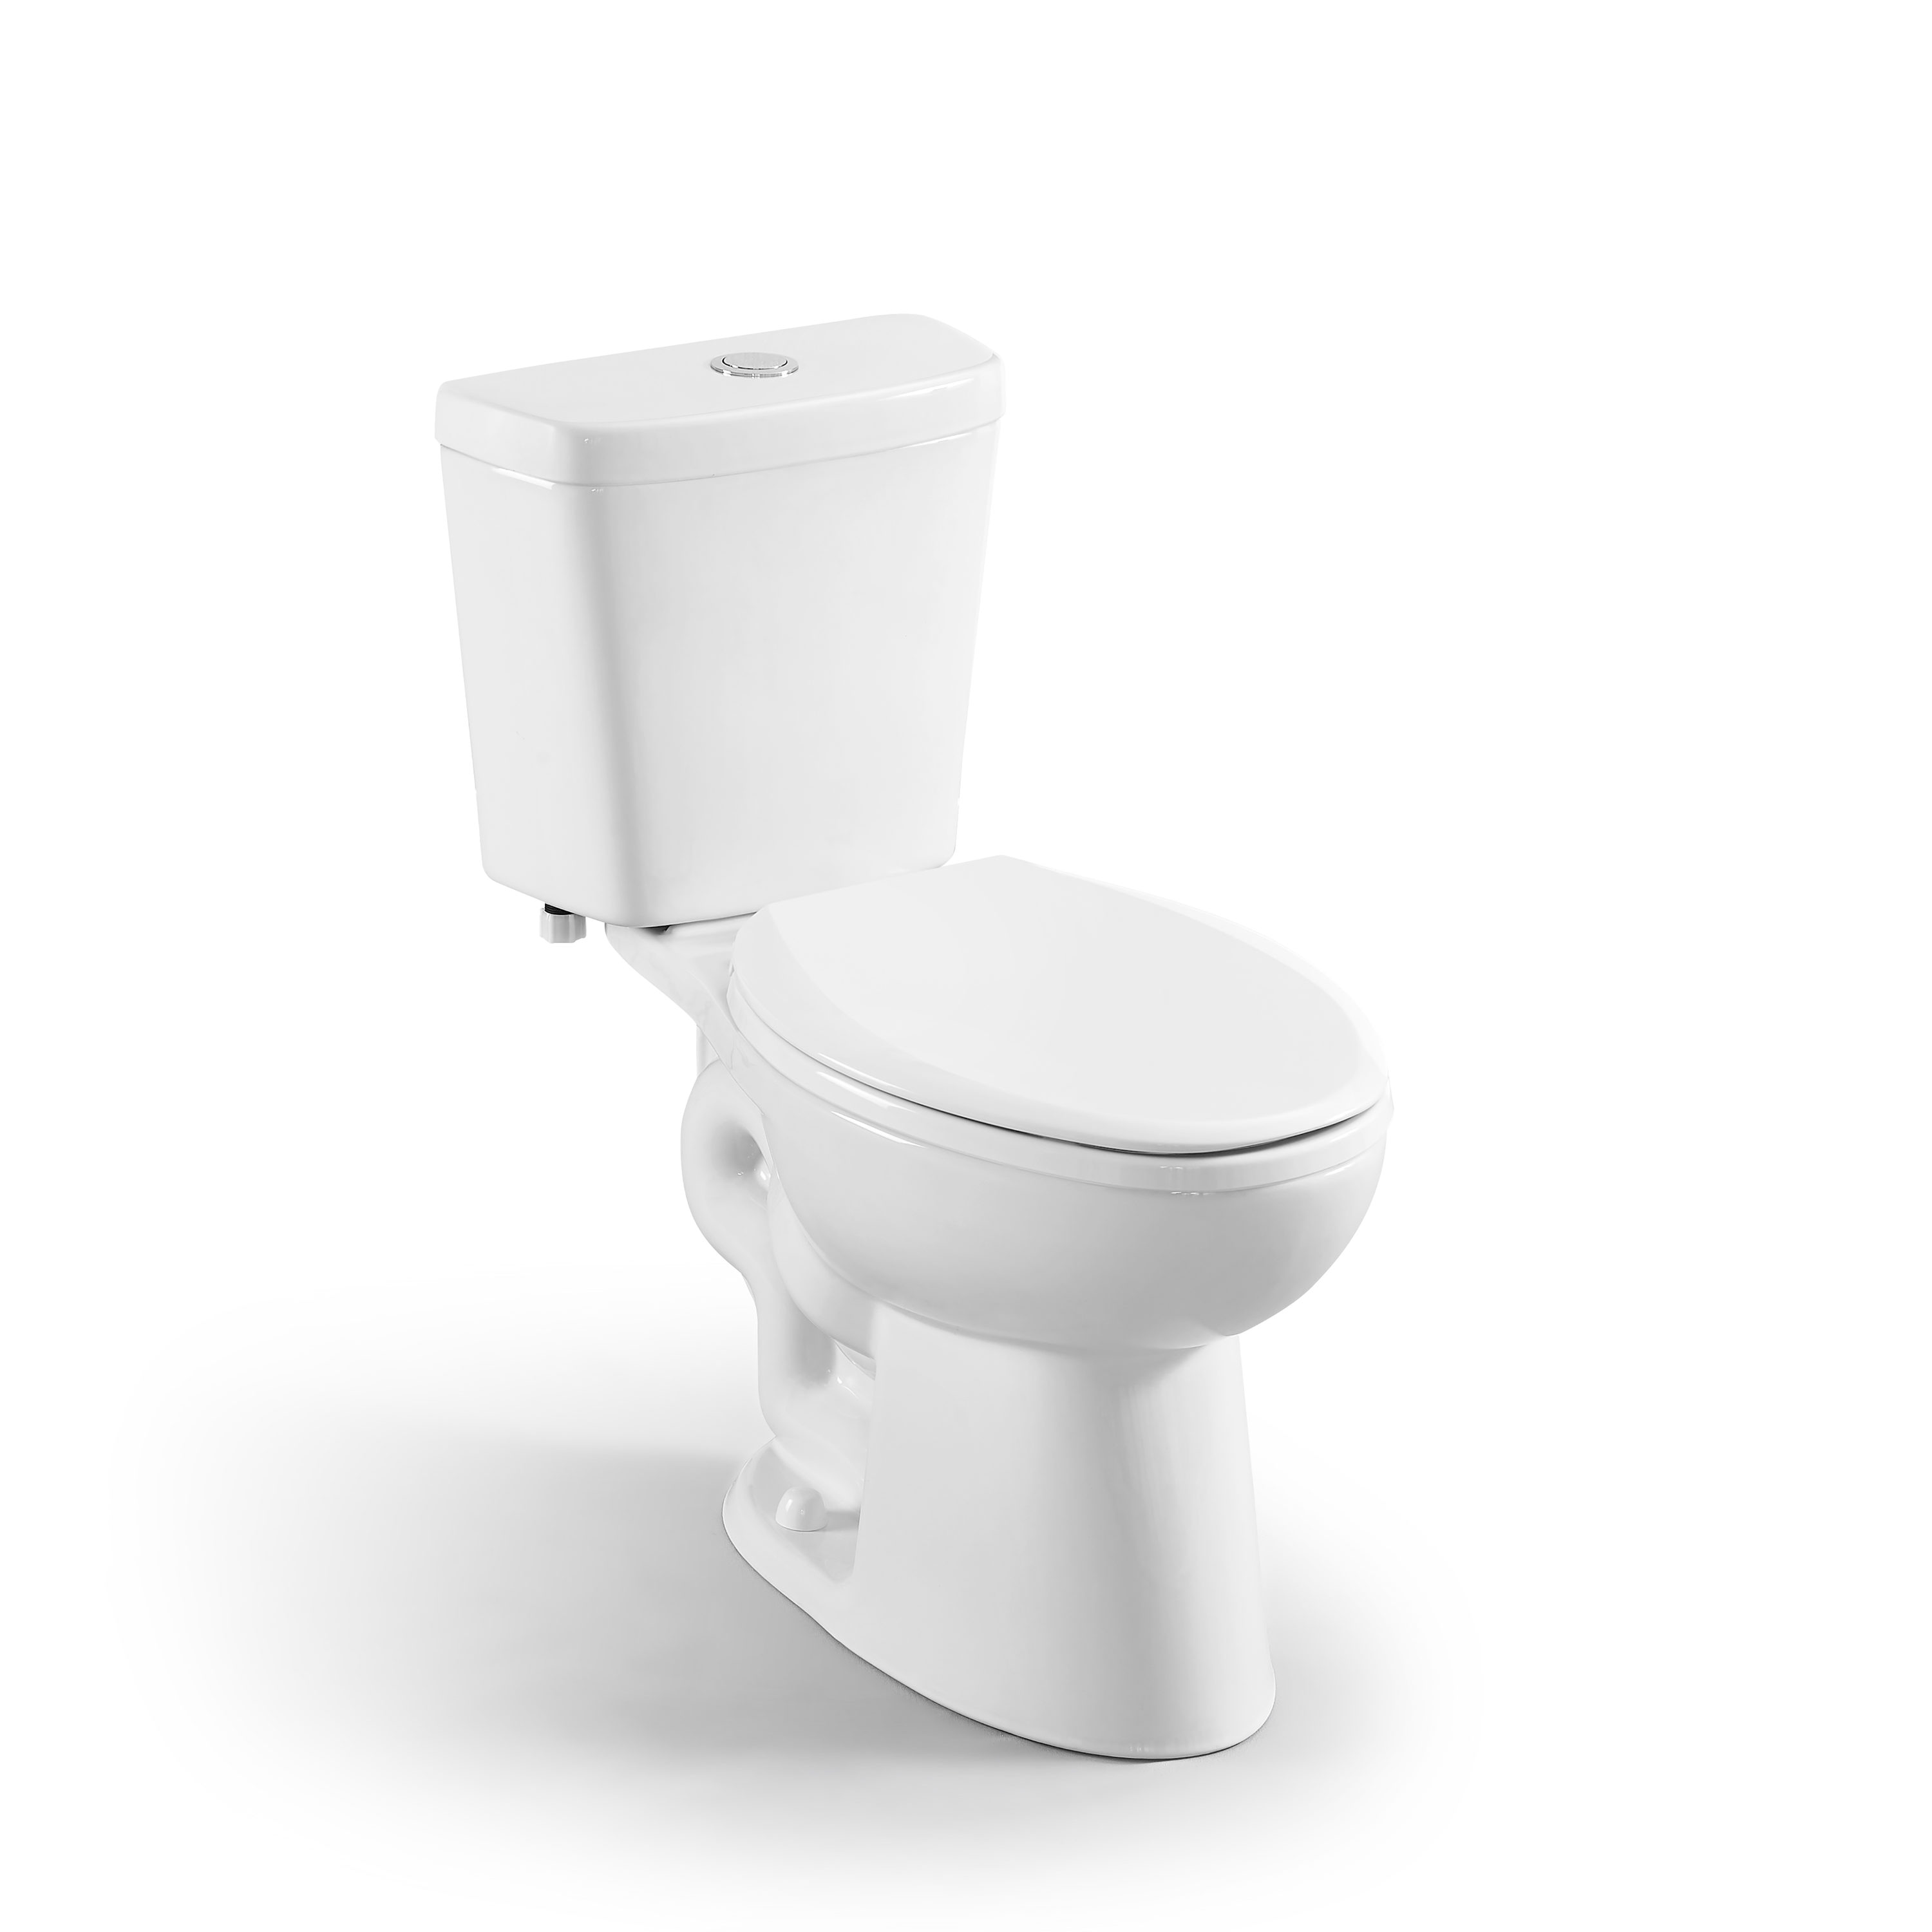 CE Hotel Project Restroom High Quality Toilet Seat, Sanitary Ware